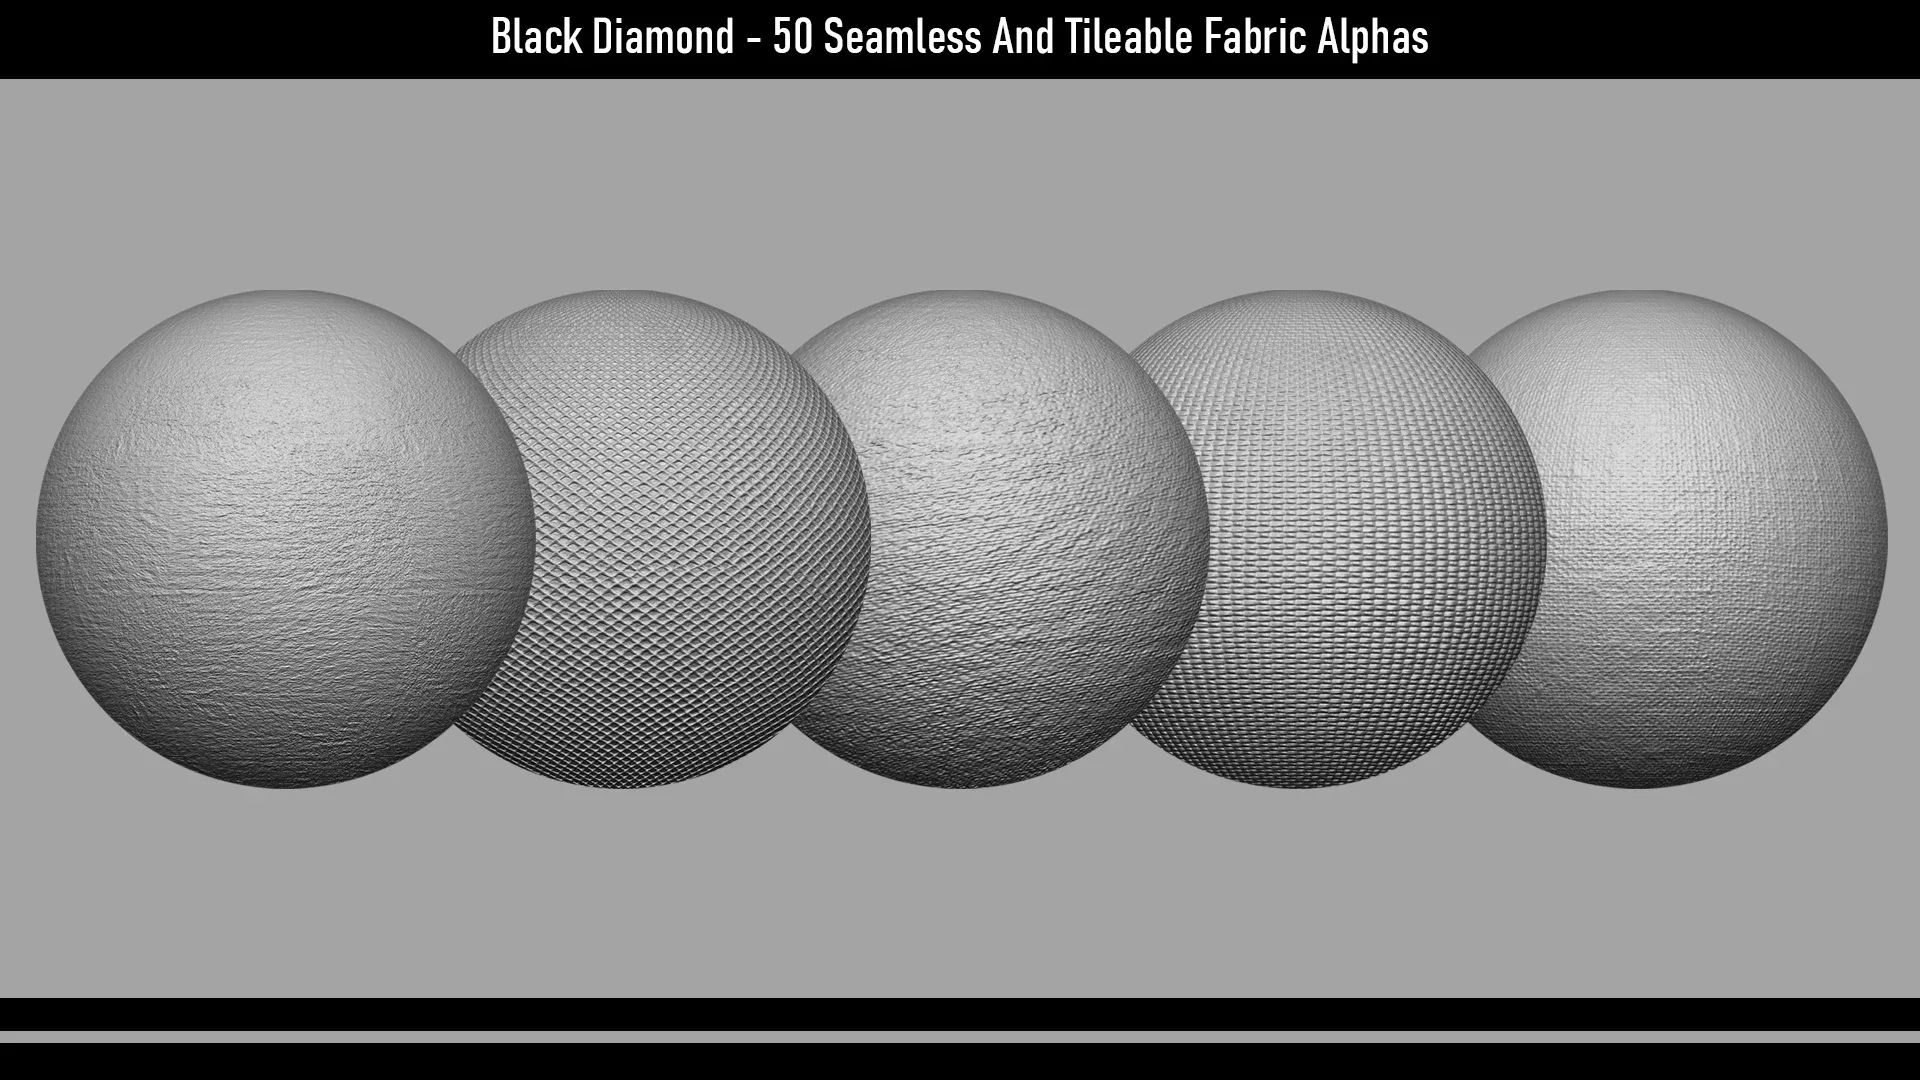 50 Seamless And Tileable Fabric Alphas